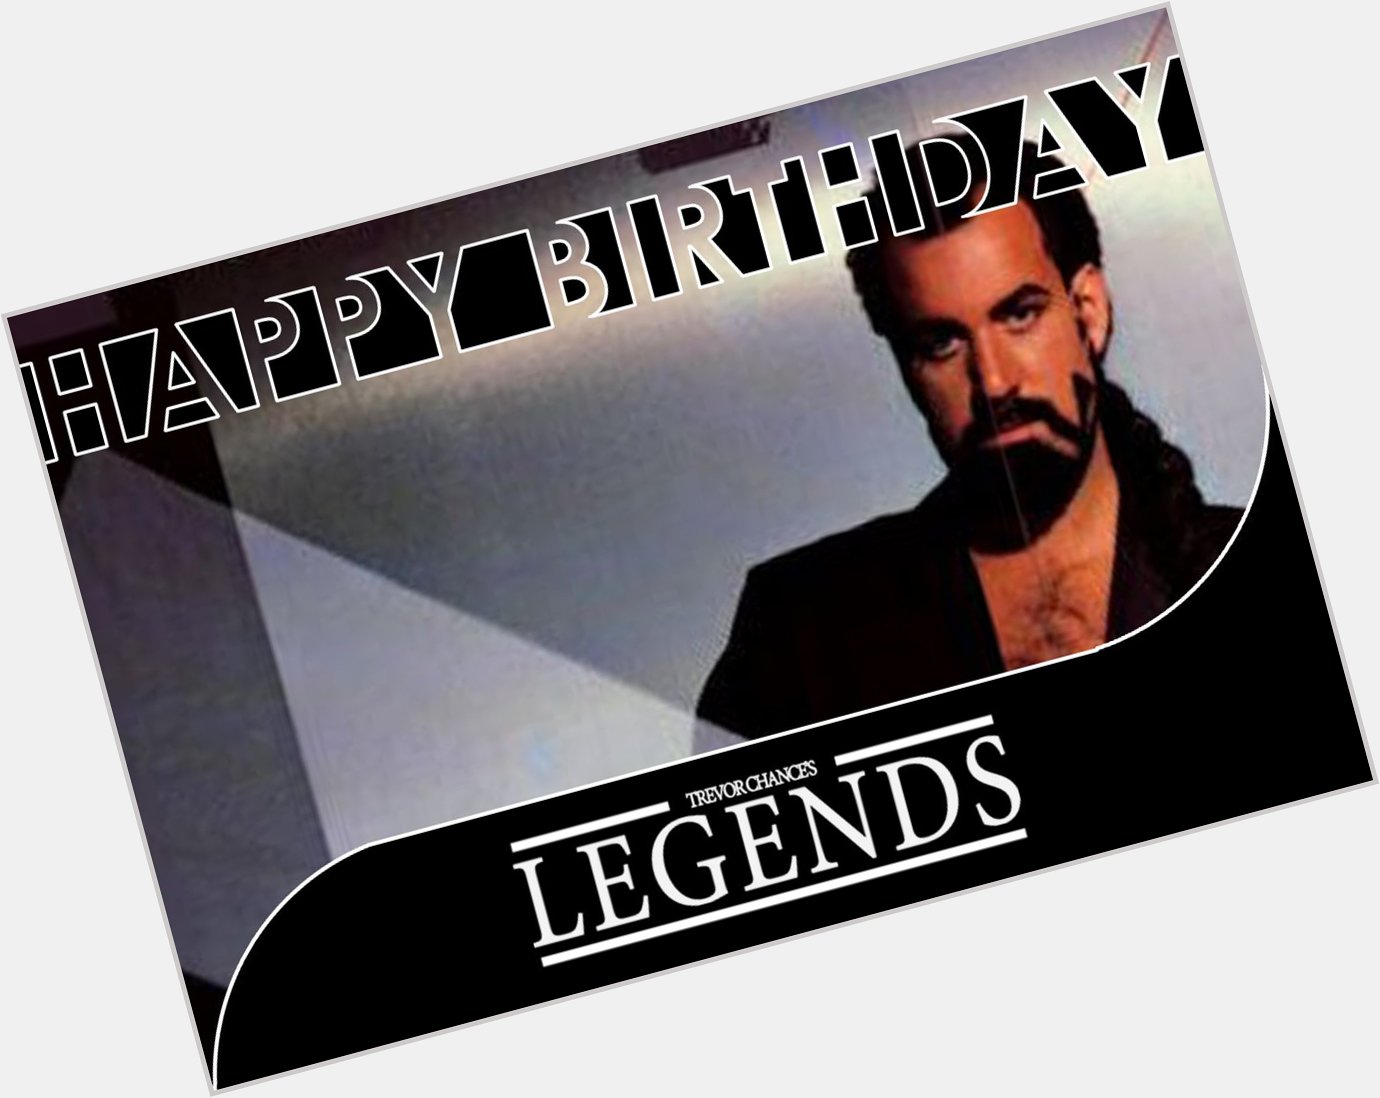 Happy Birthday to Michael Sembello! The musician, songwriter & producer turns 63 today... 